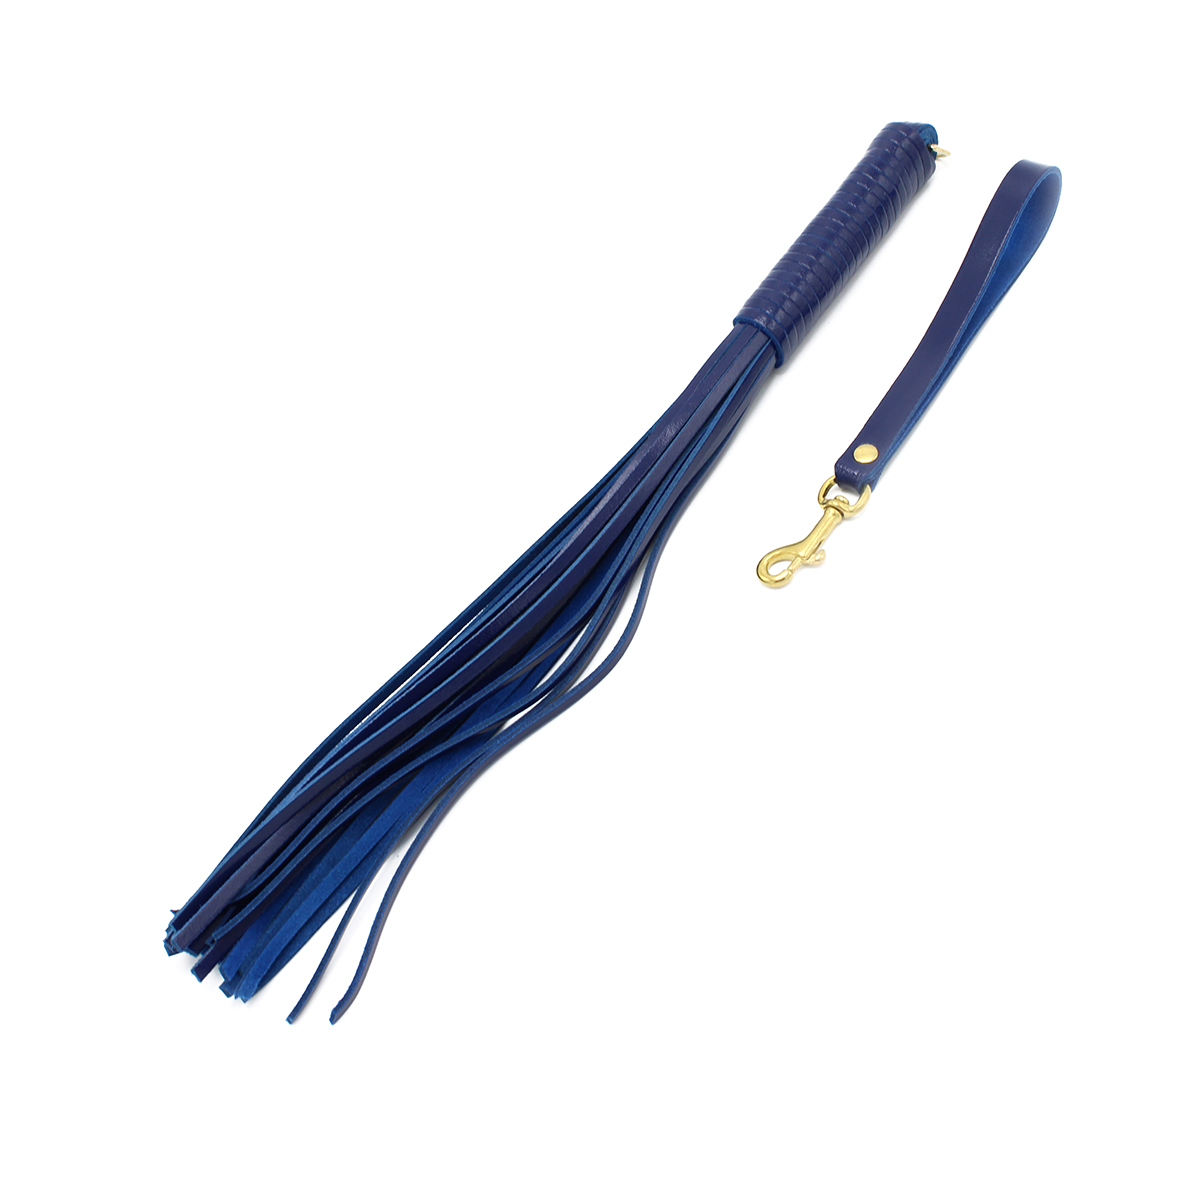 Blue-leather-whip-with-handle-134-KIO-0314-1